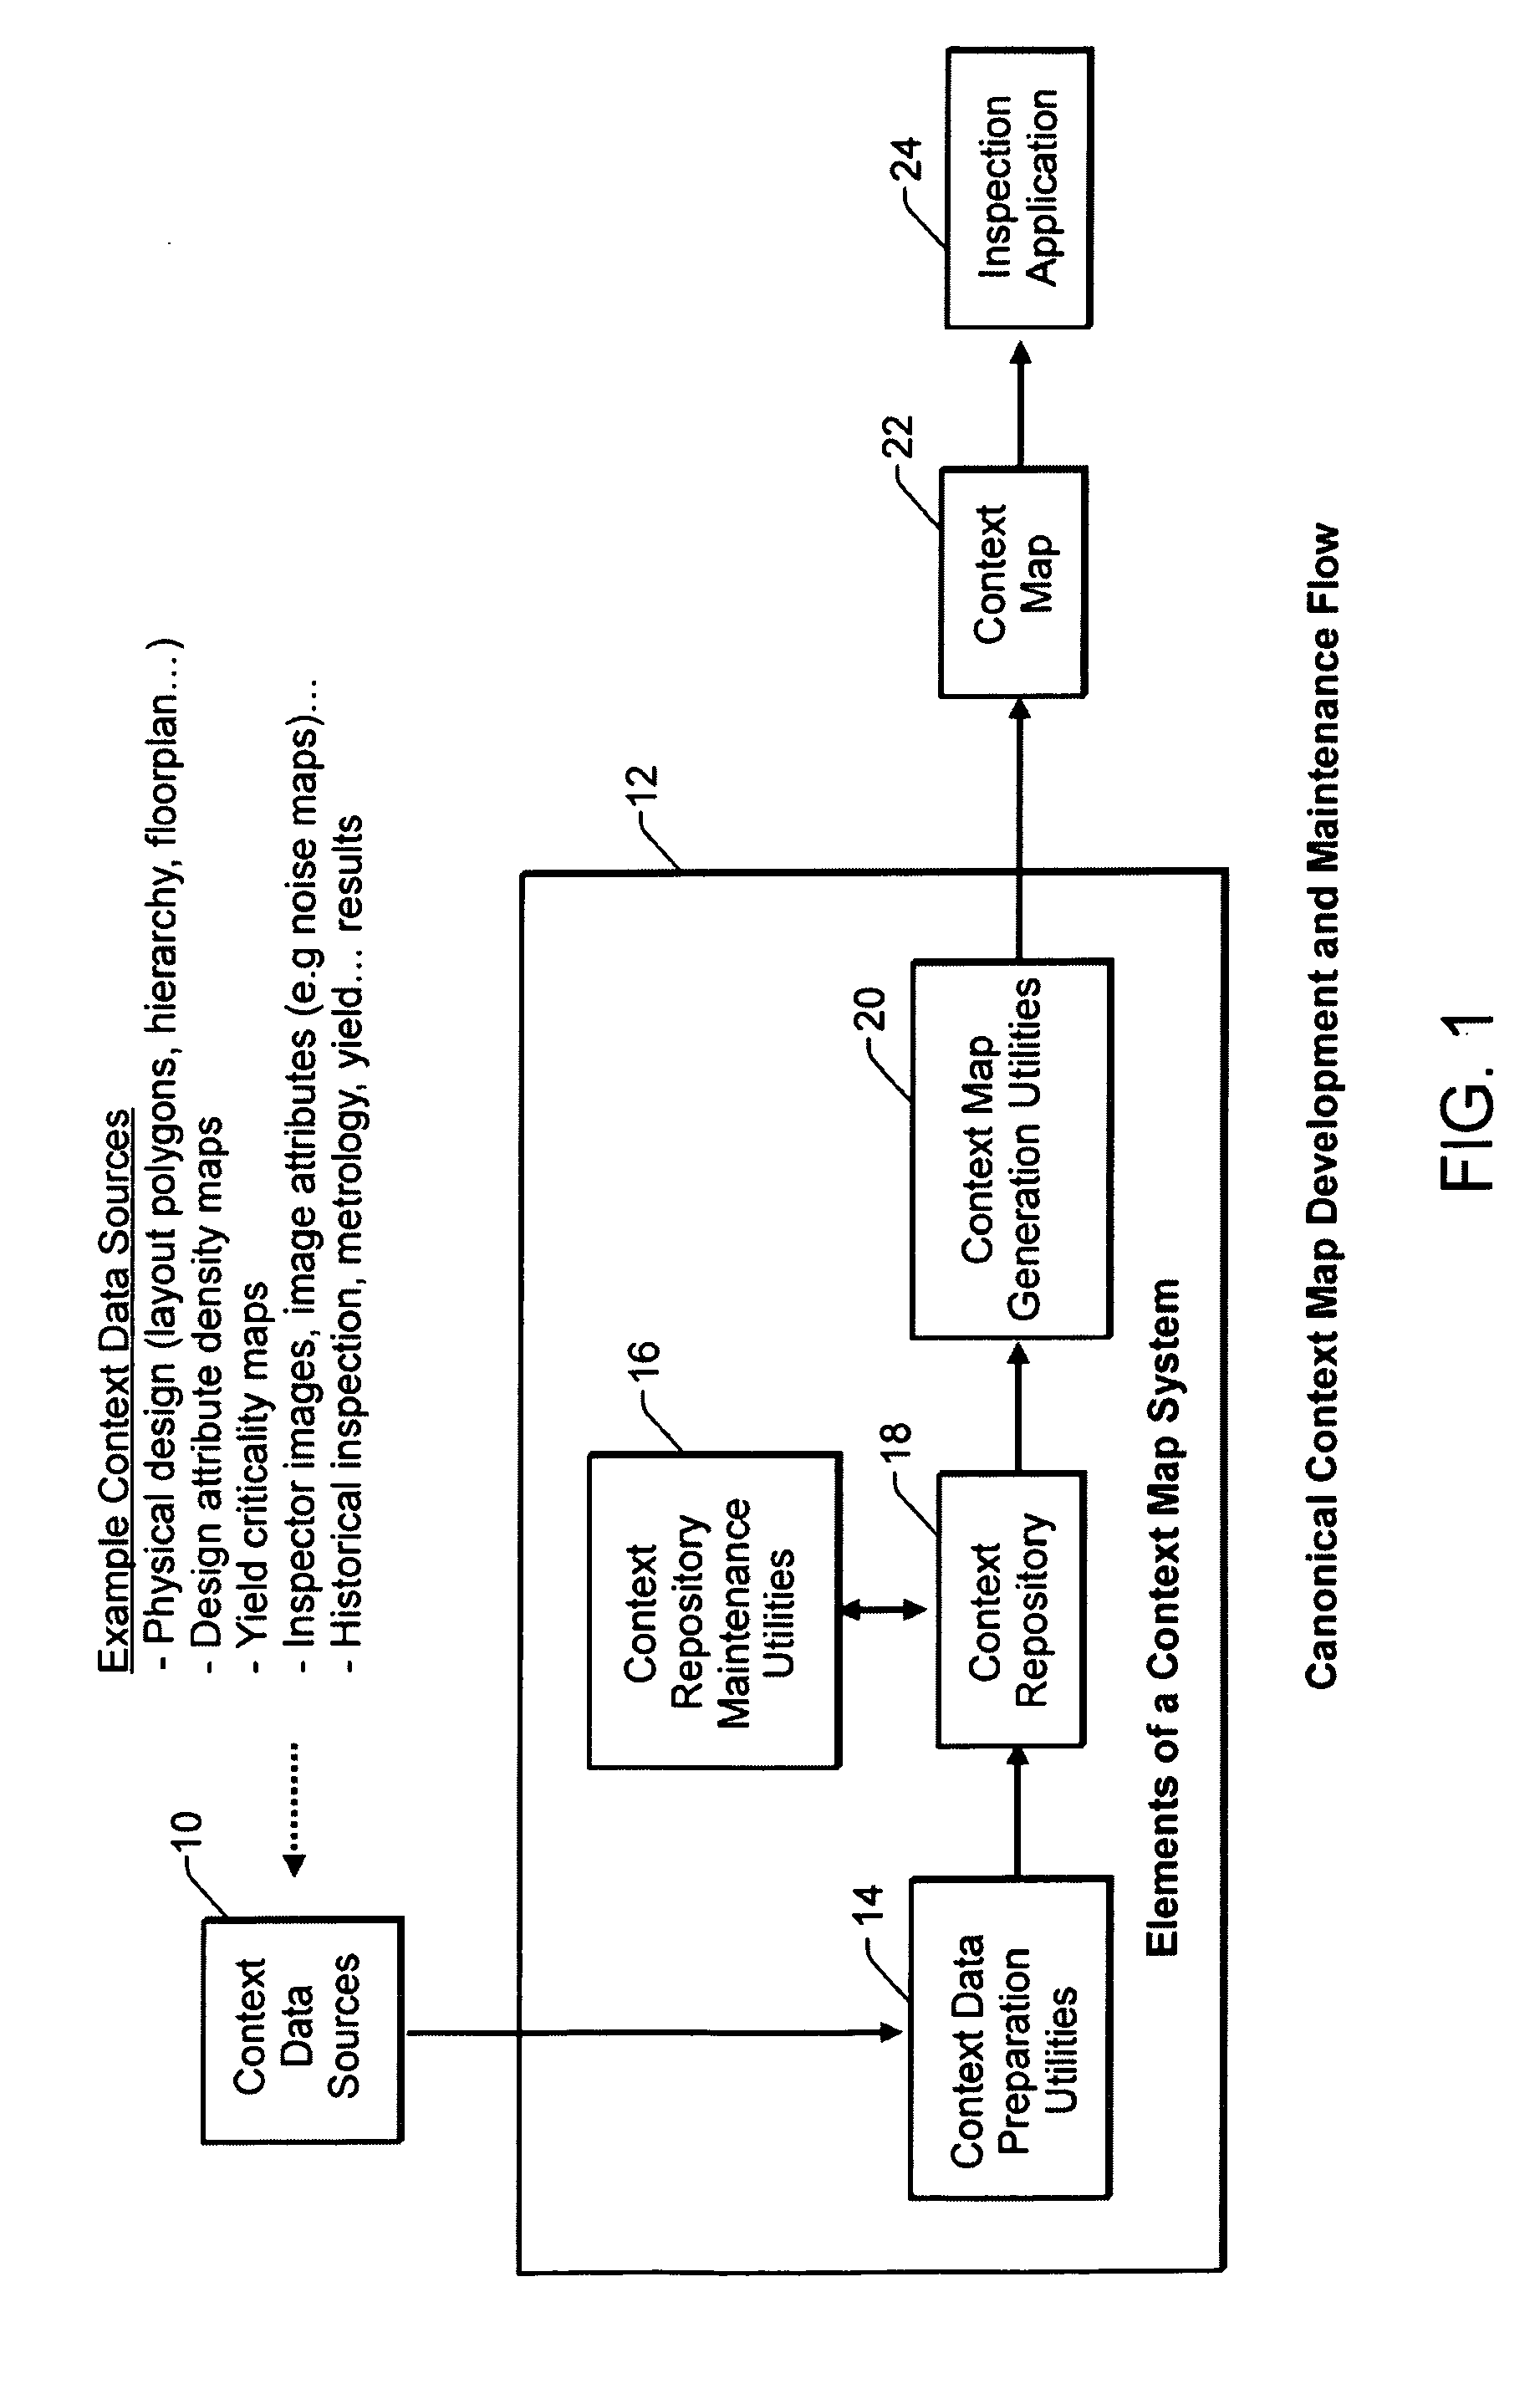 Systems and methods for creating inspection recipes